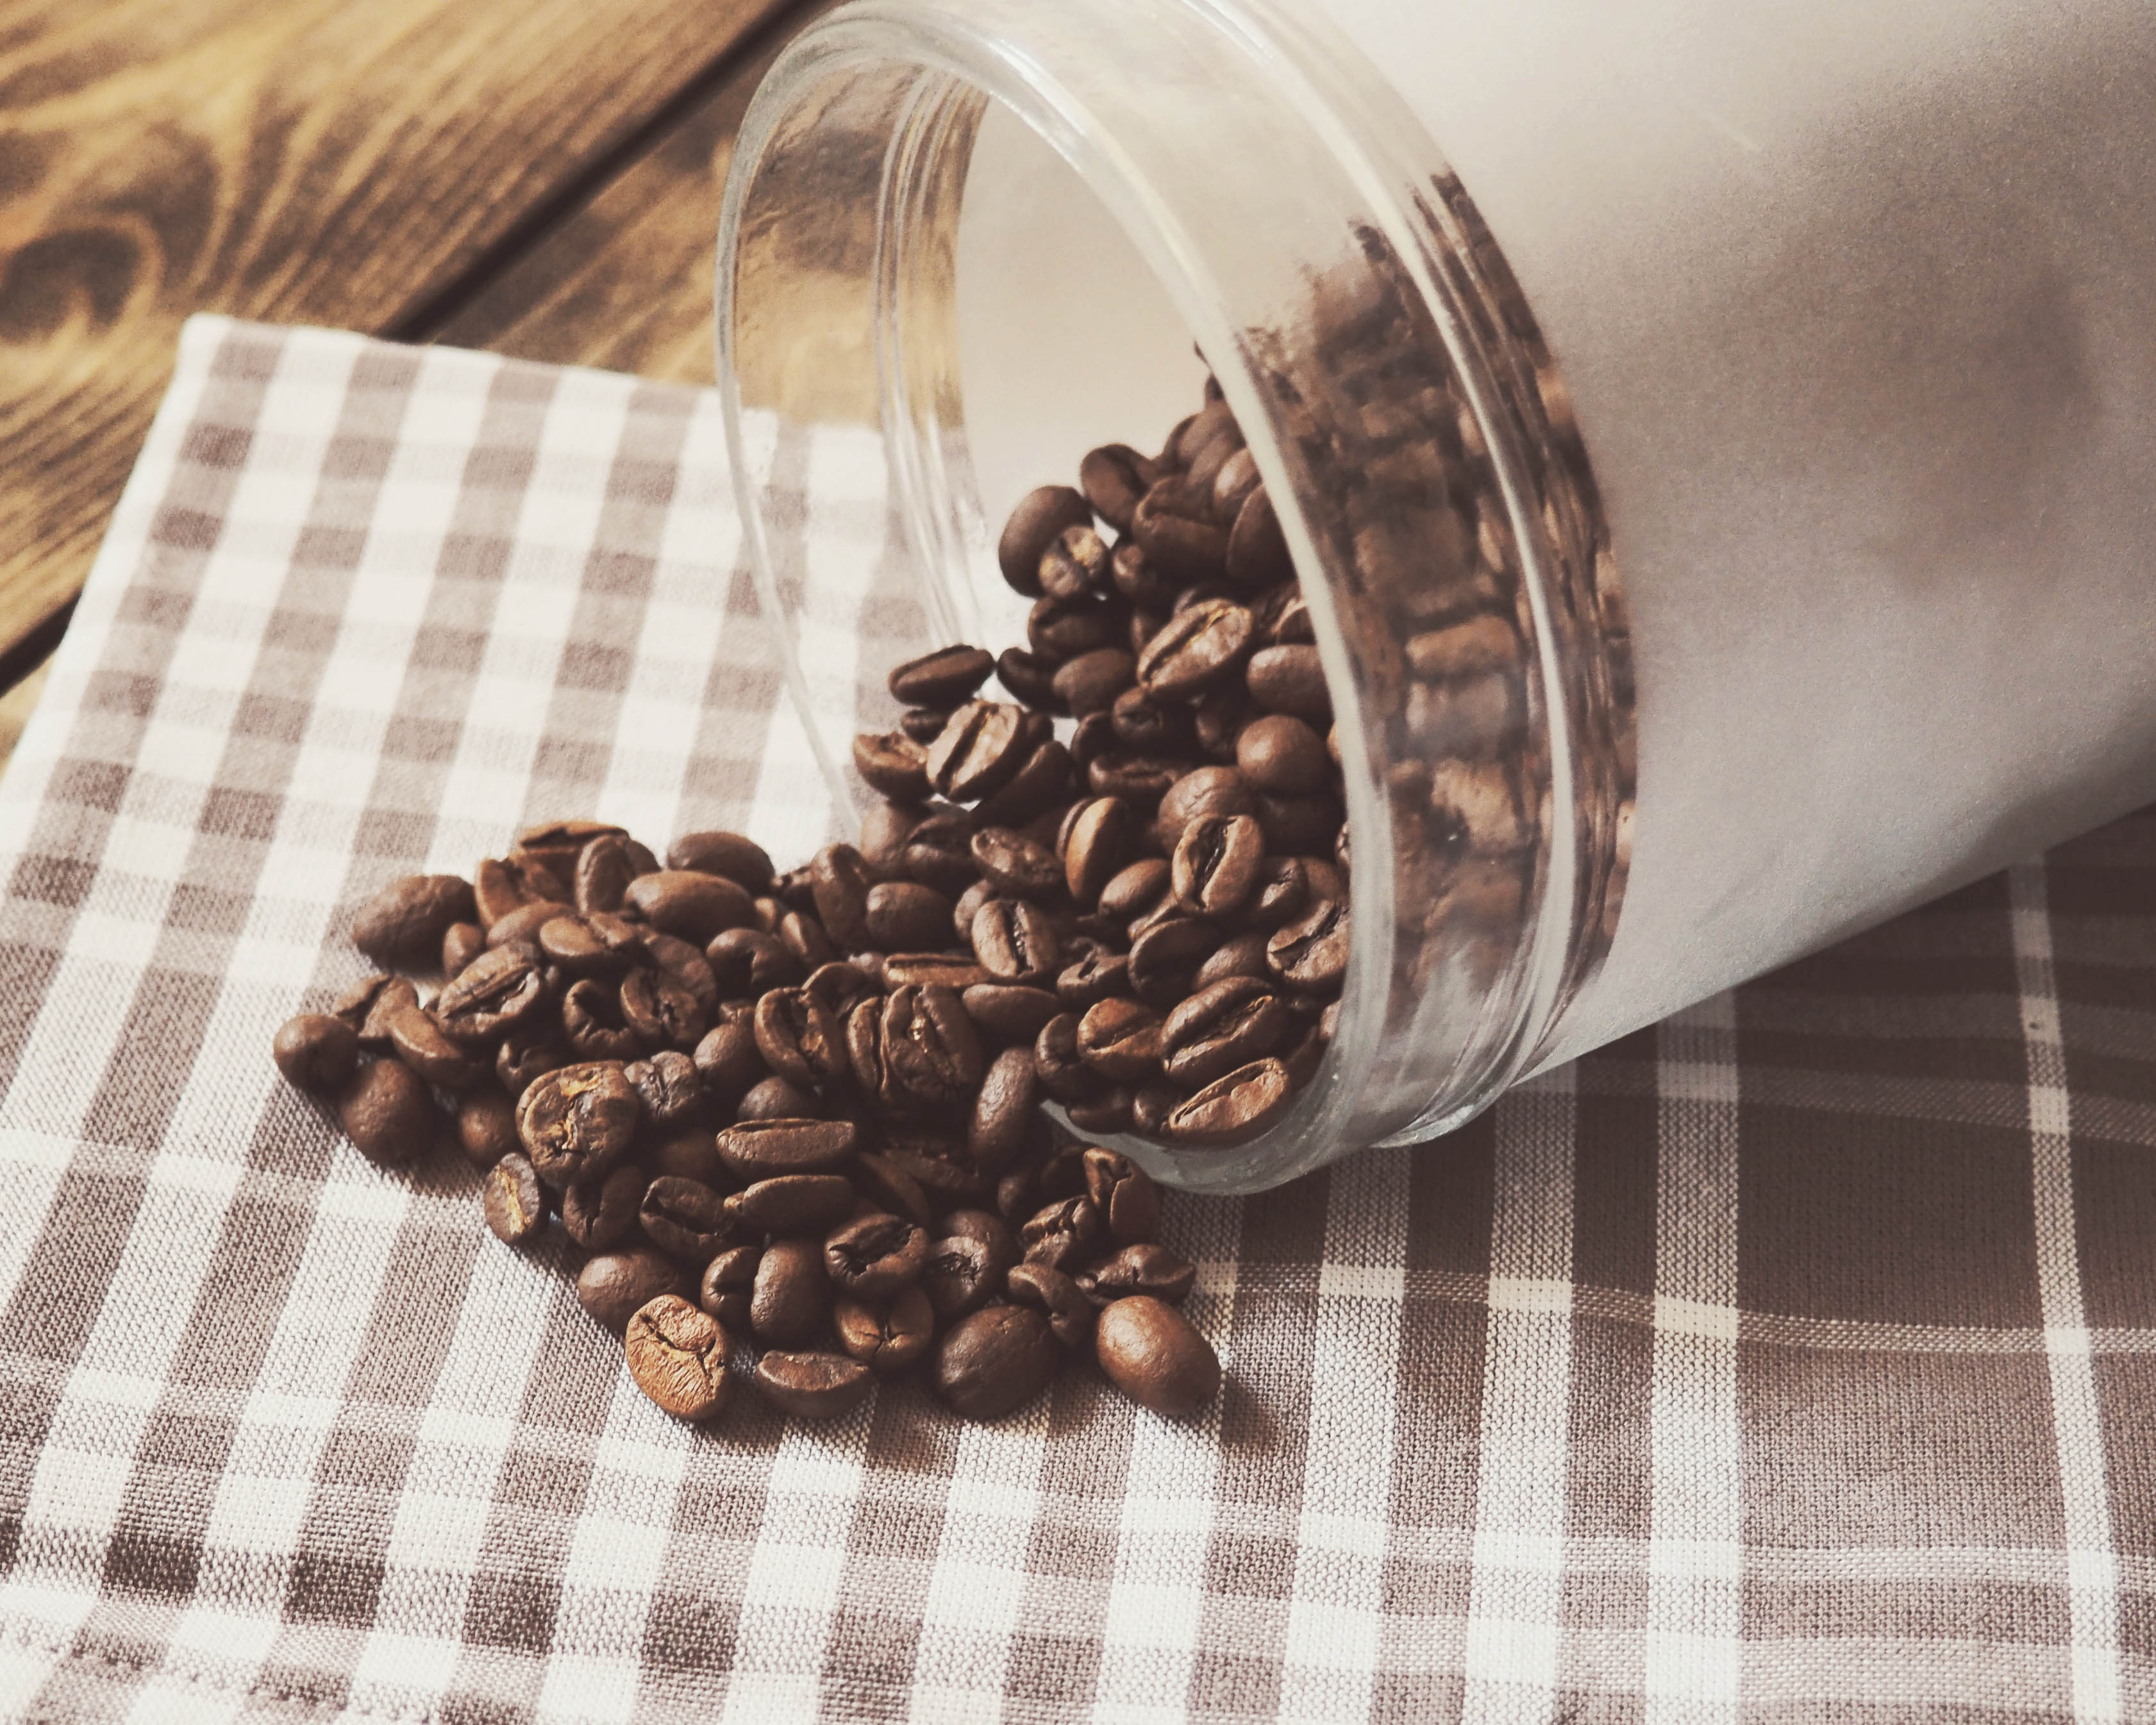 A photograph of a jar with coffee beans spilling out of it on top of a checkered cloth.